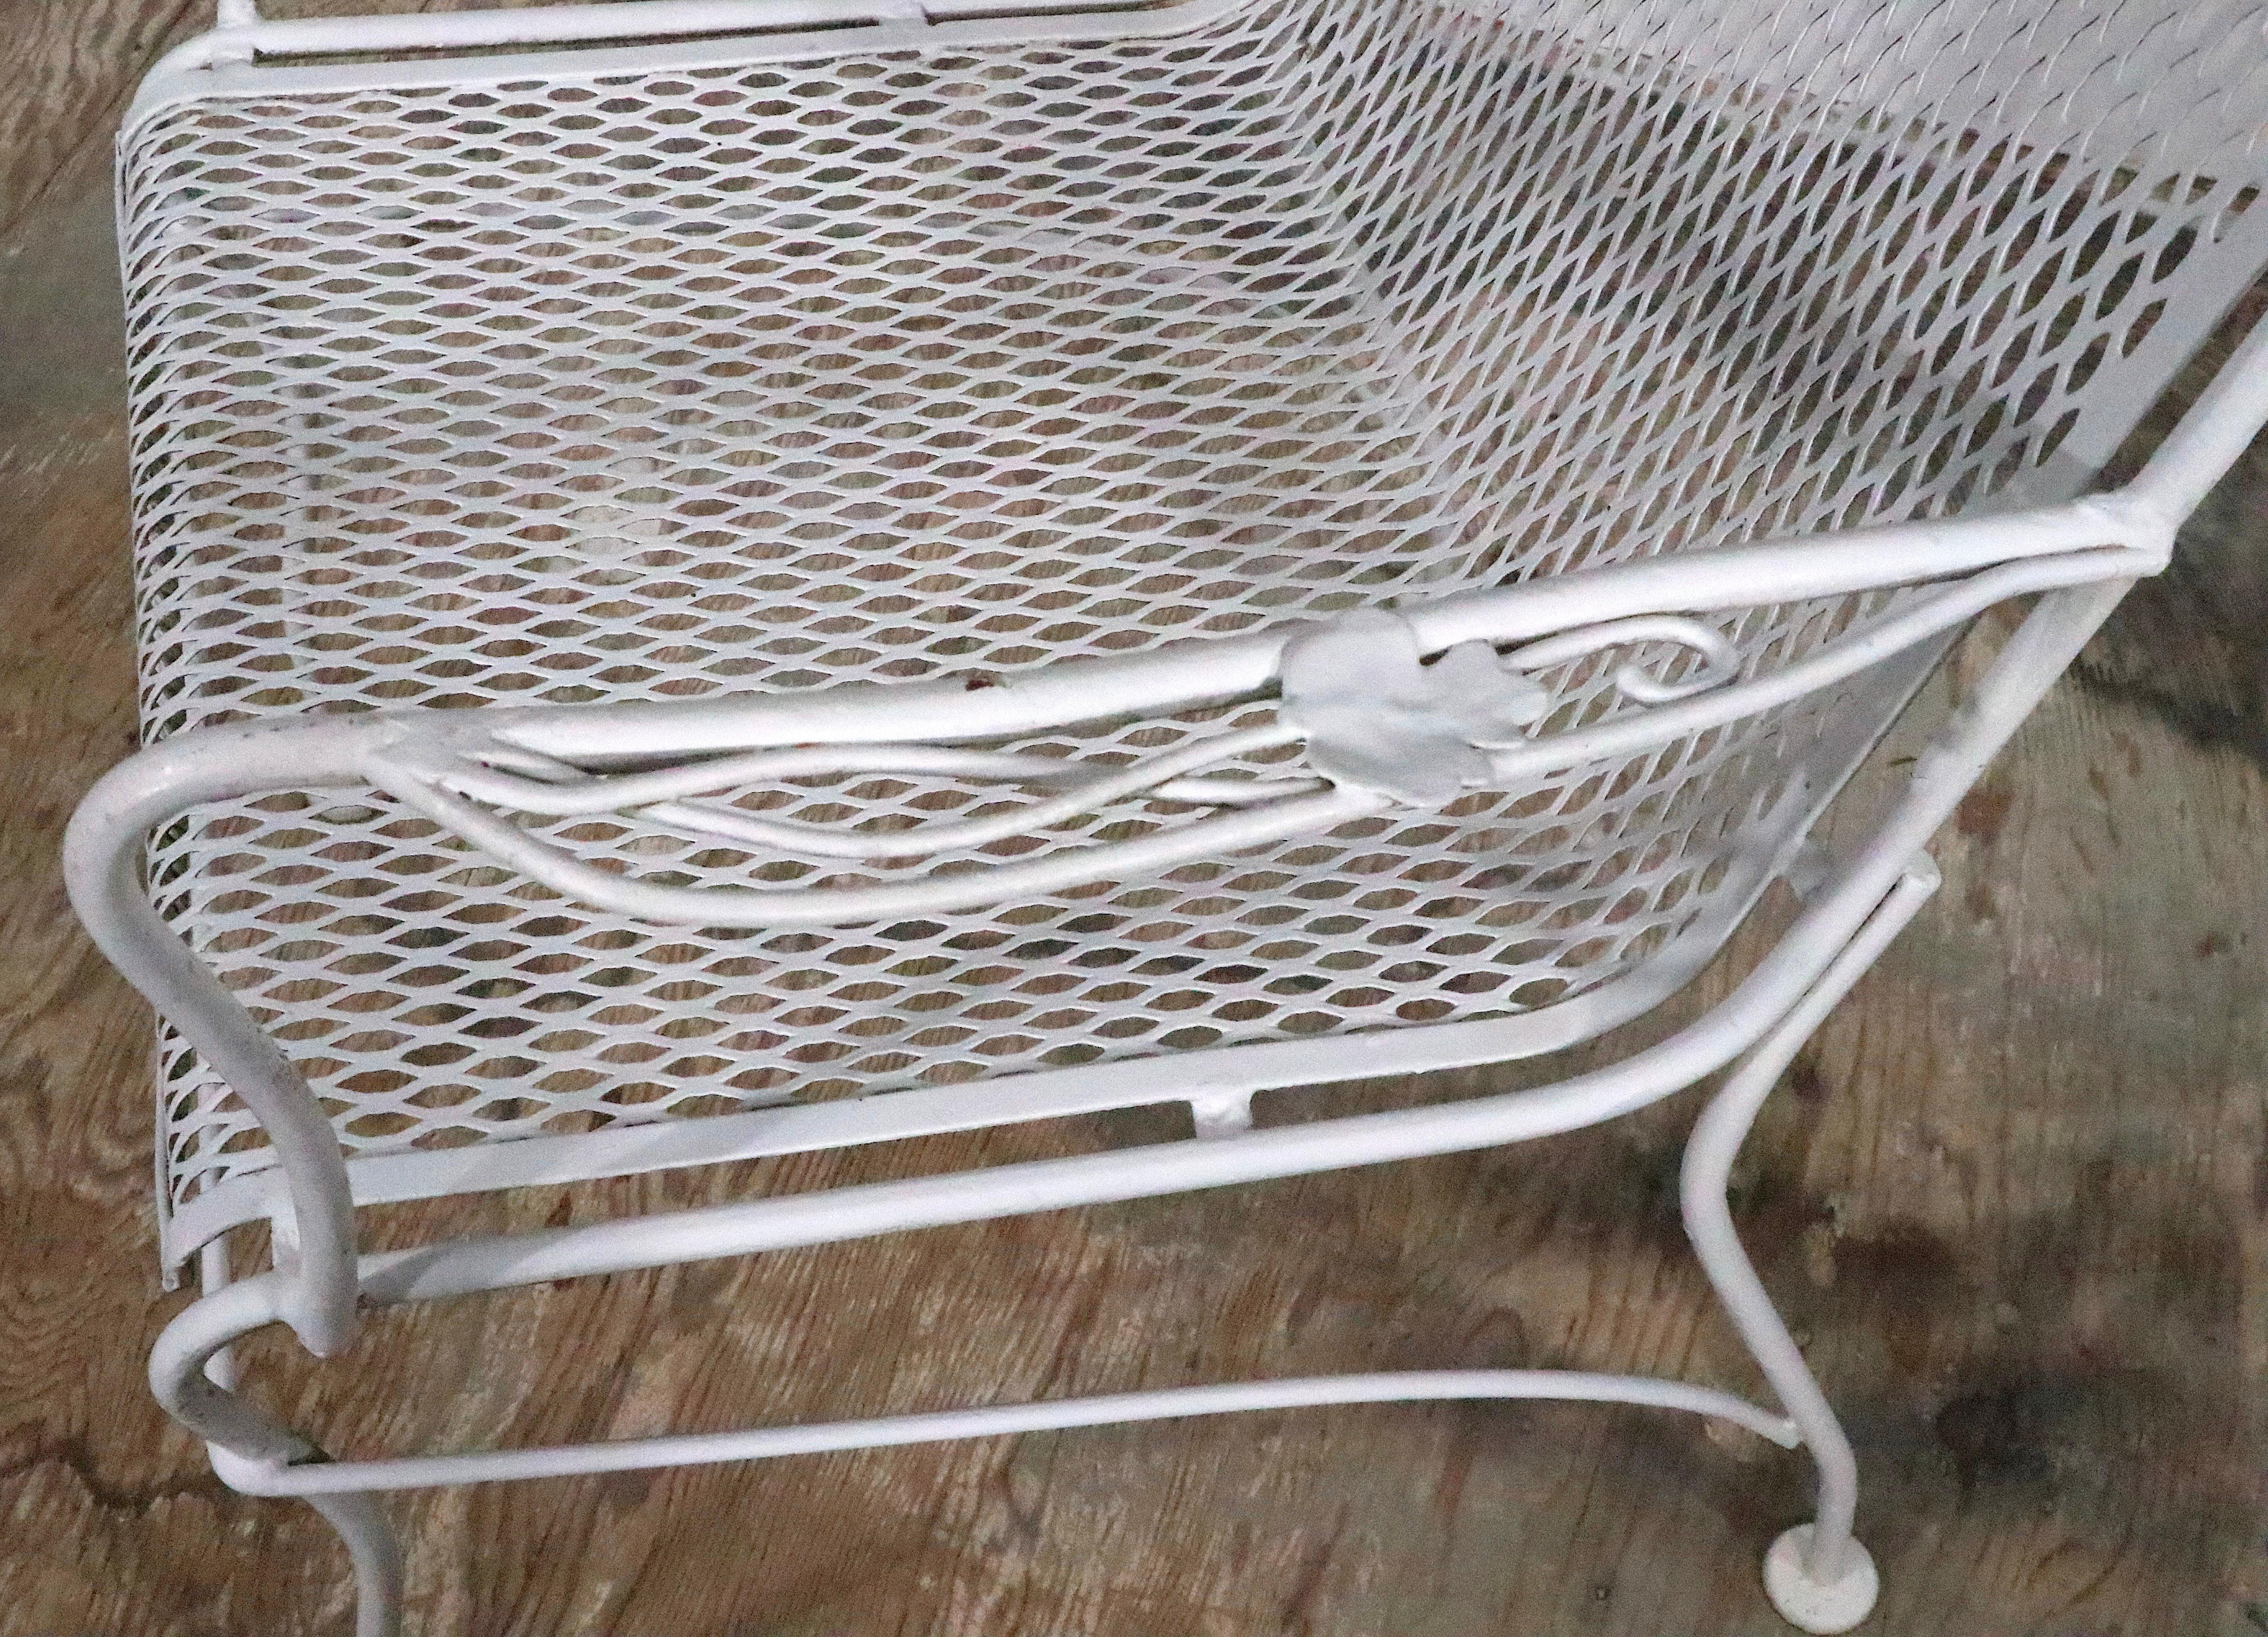 Pr. Wrought Iron Metal Mesh Garden Patio Poolside Chairs by Woodard c. 1950/70's For Sale 1